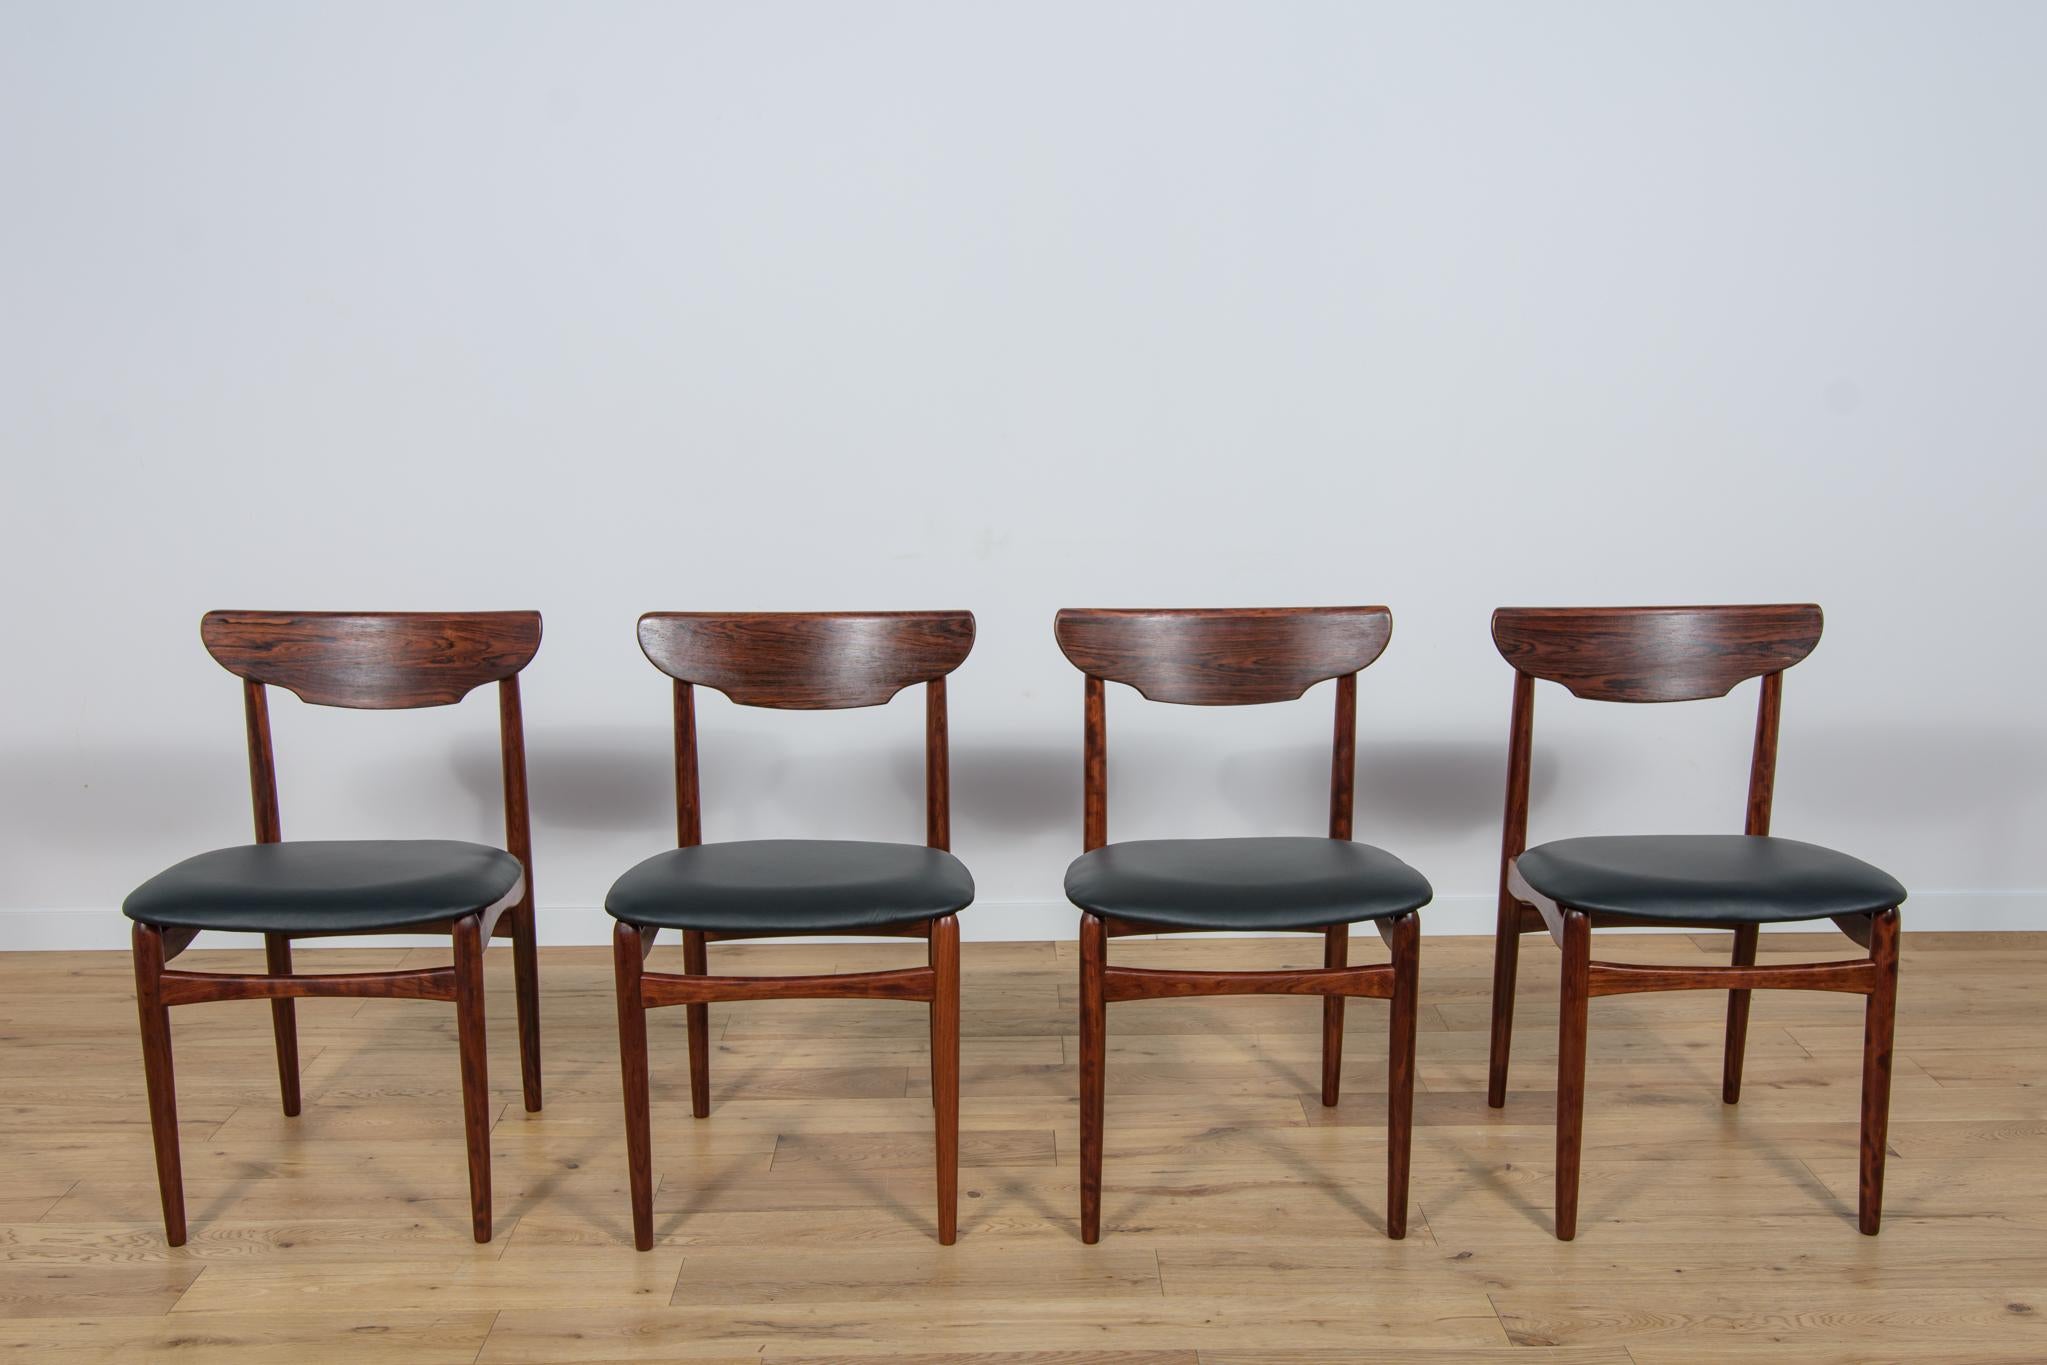 The set of four chairs was produced in Denmark in the 1960s. The chairs have an interesting form combined with high craftsmanship, characteristic of Danish design, as evidenced by, among others, unique backrests. Frame made of rosewood. Upholstery